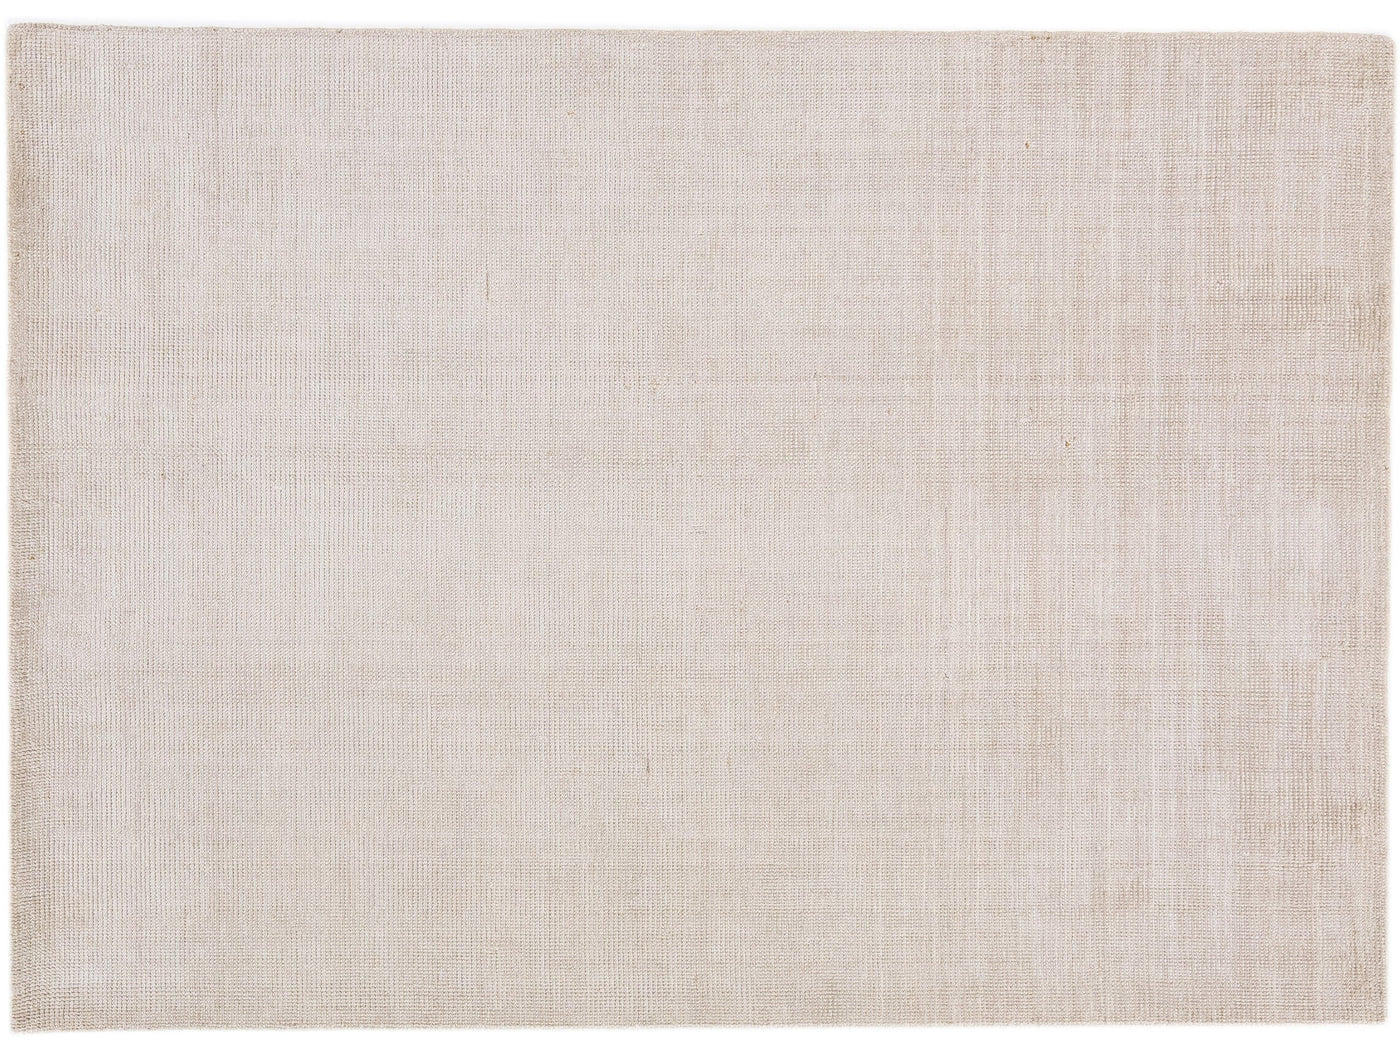 Modern Groove Collection Rug 5 x 8